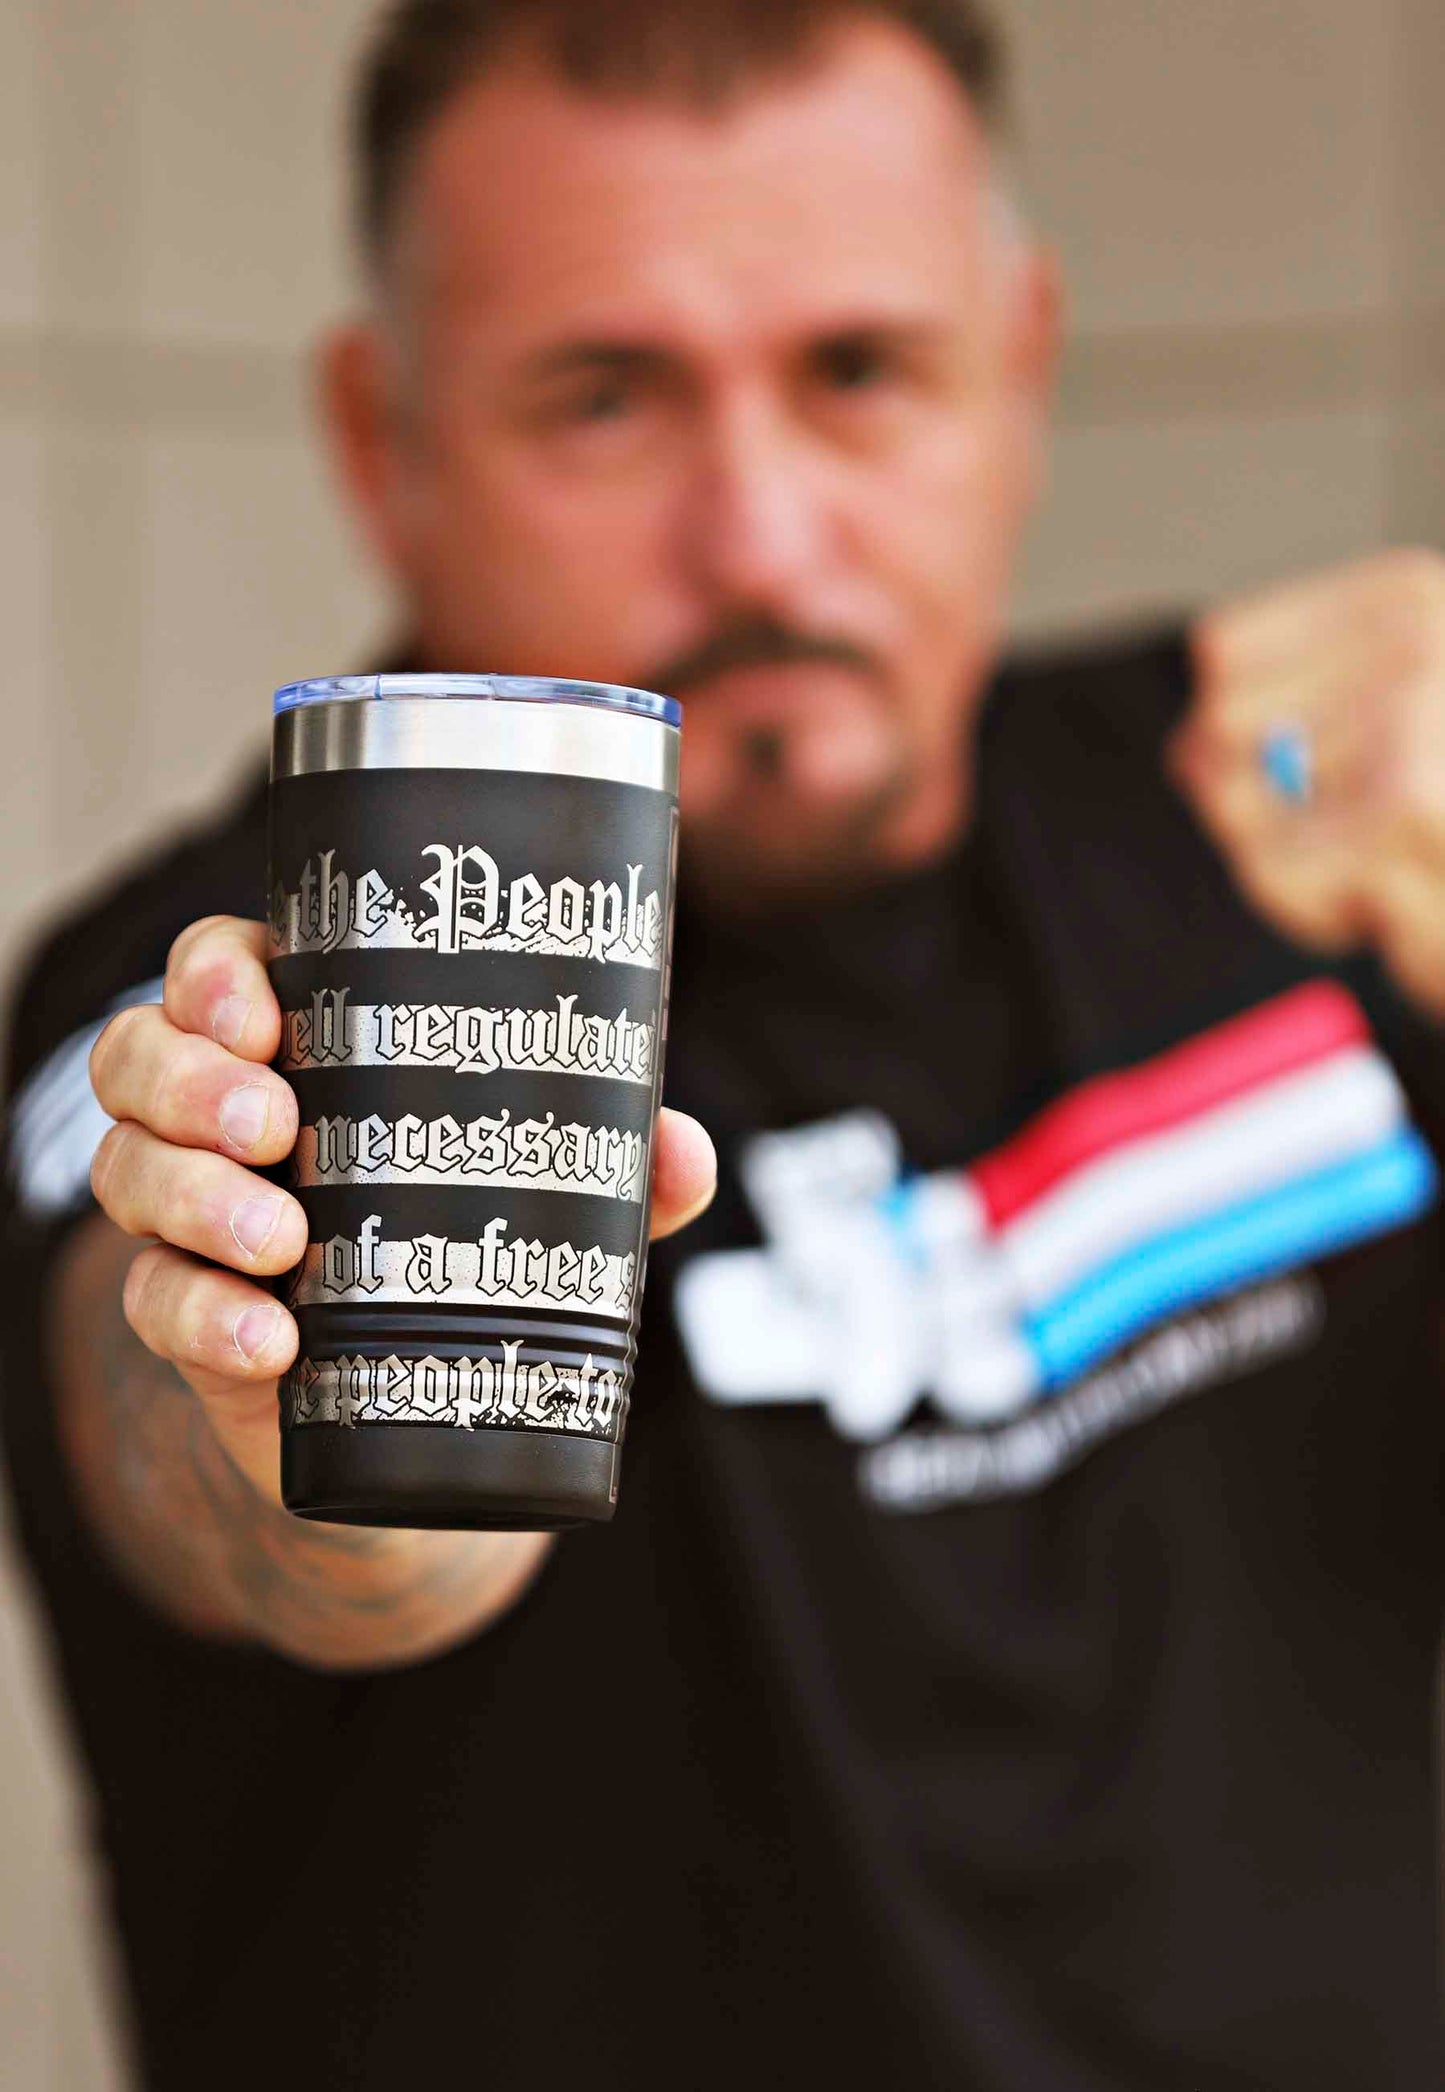 Second amendment tumbler held by MMA champ shannon ritch